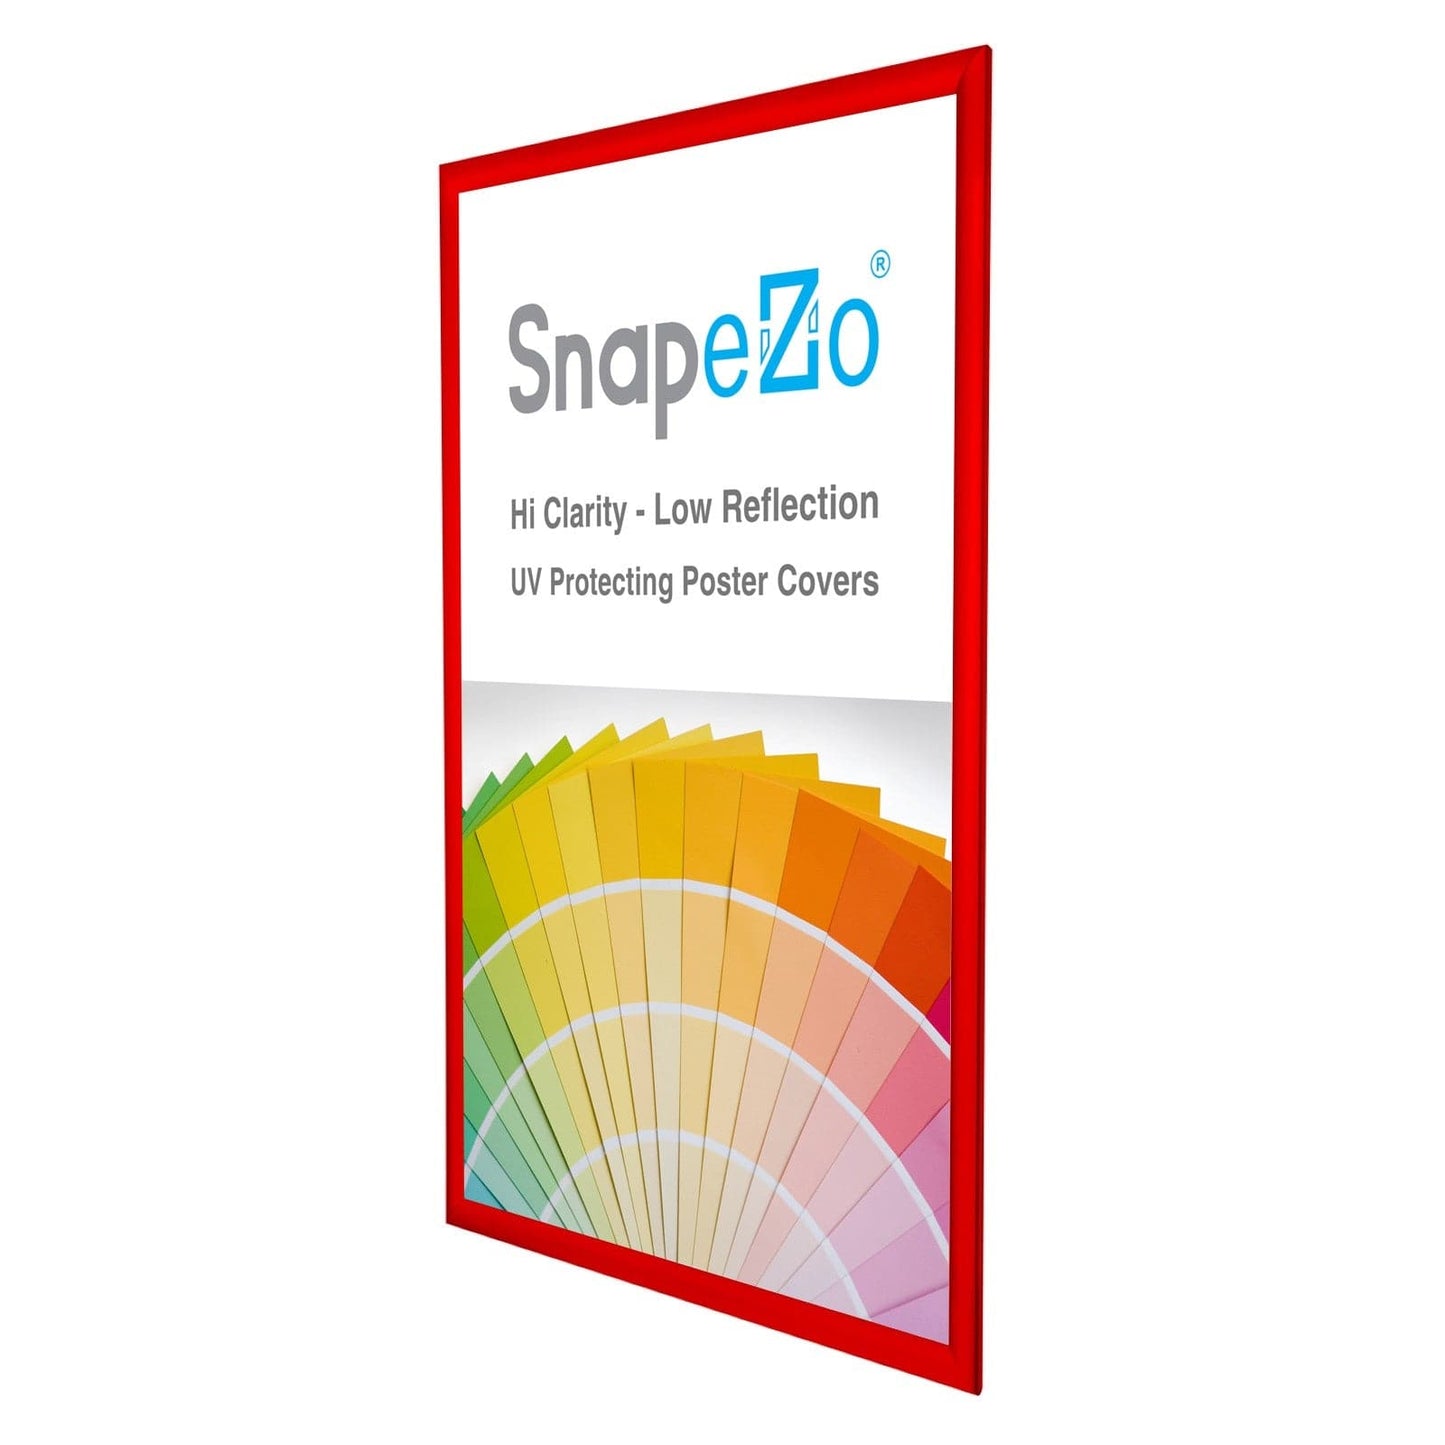 21x32 Red SnapeZo® Snap Frame - 1.2" Profile - Snap Frames Direct